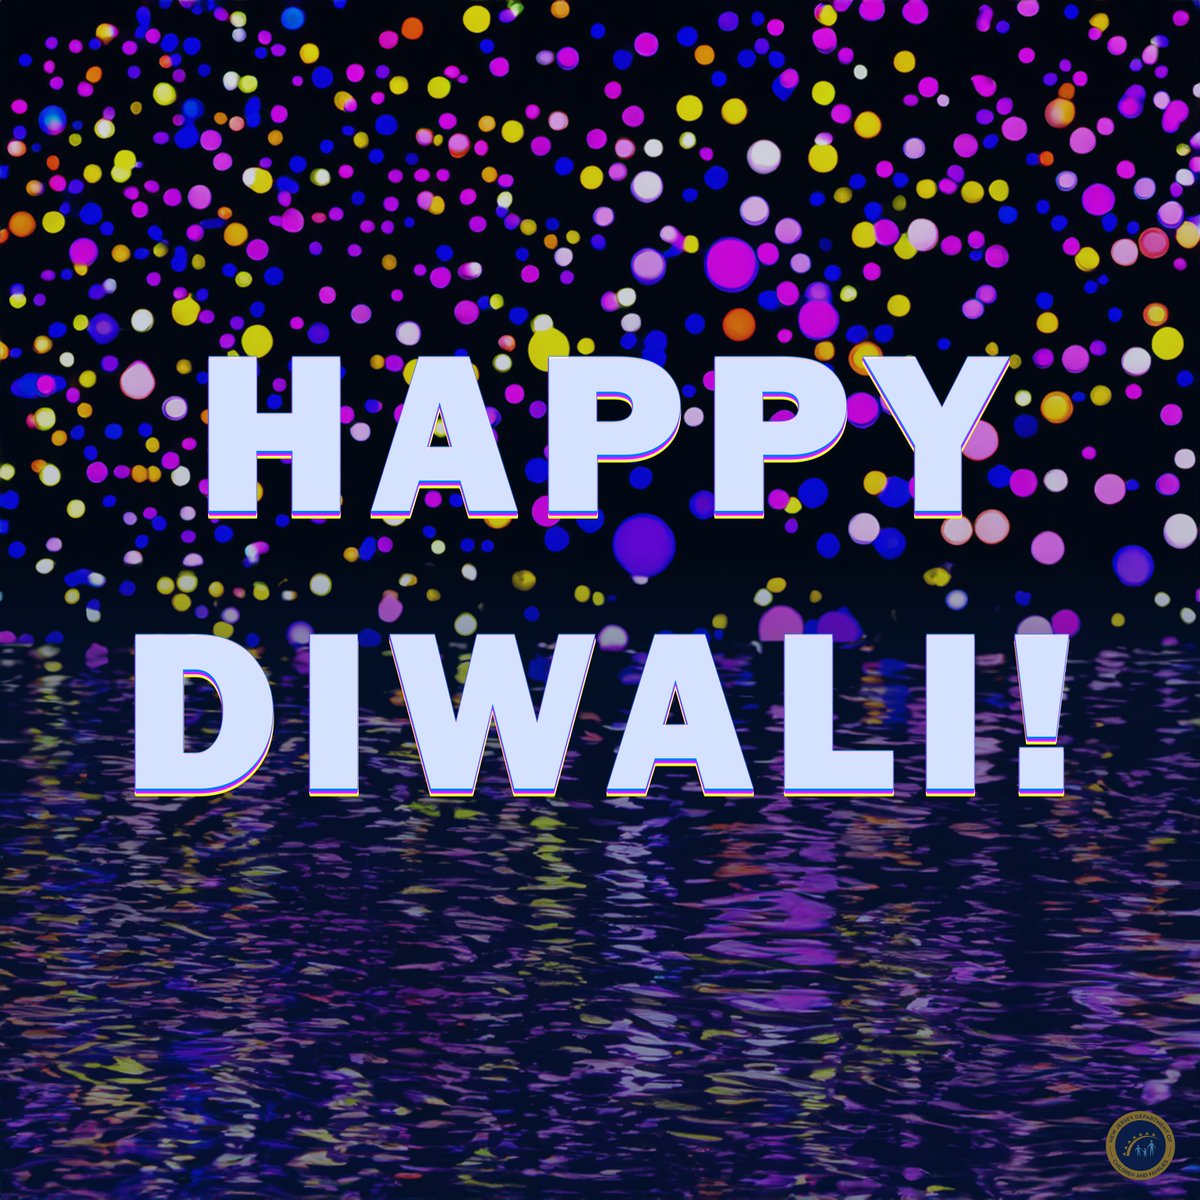 #TeamDCF wants to wish everyone who celebrates a filling and fulfilling festival of lights! 🏮🎆🌟✨🌠💫⭐🎇🕯 Happy #Diwali!